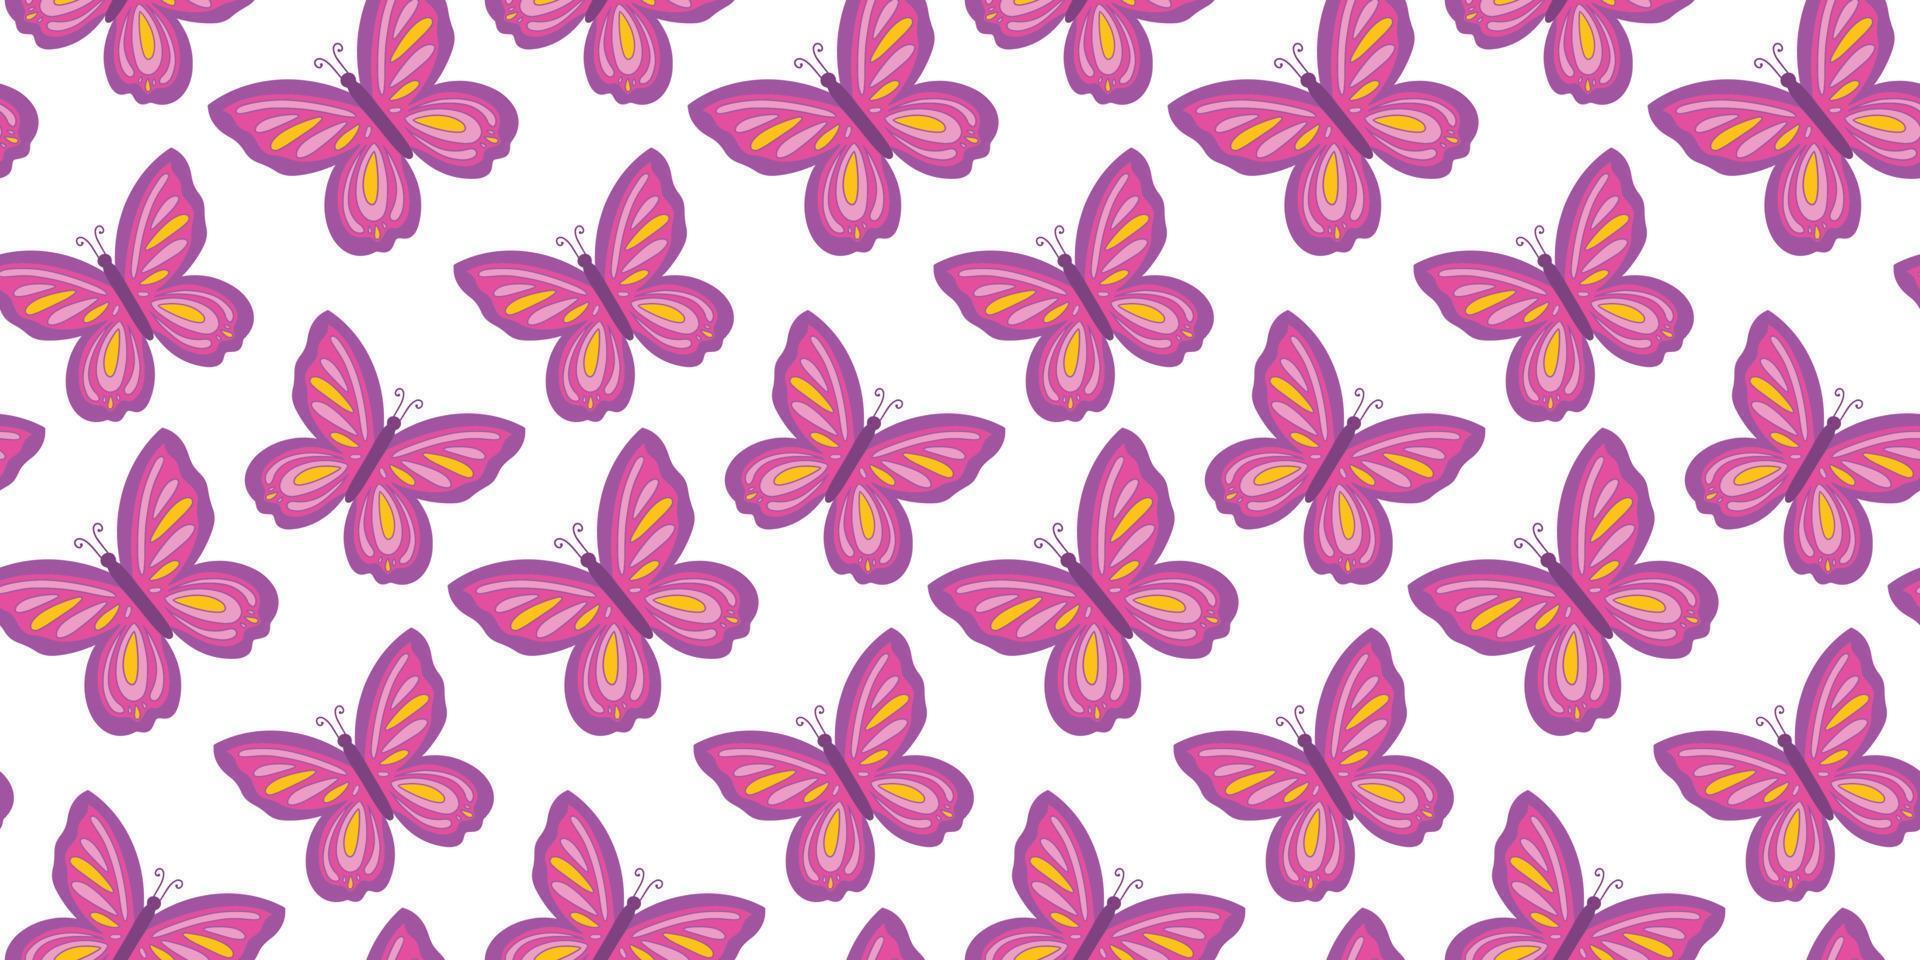 Seamless pattern with colorful butterfly. seamless pattern vector background. Retro vintage nostalgic girlish repeat texture design